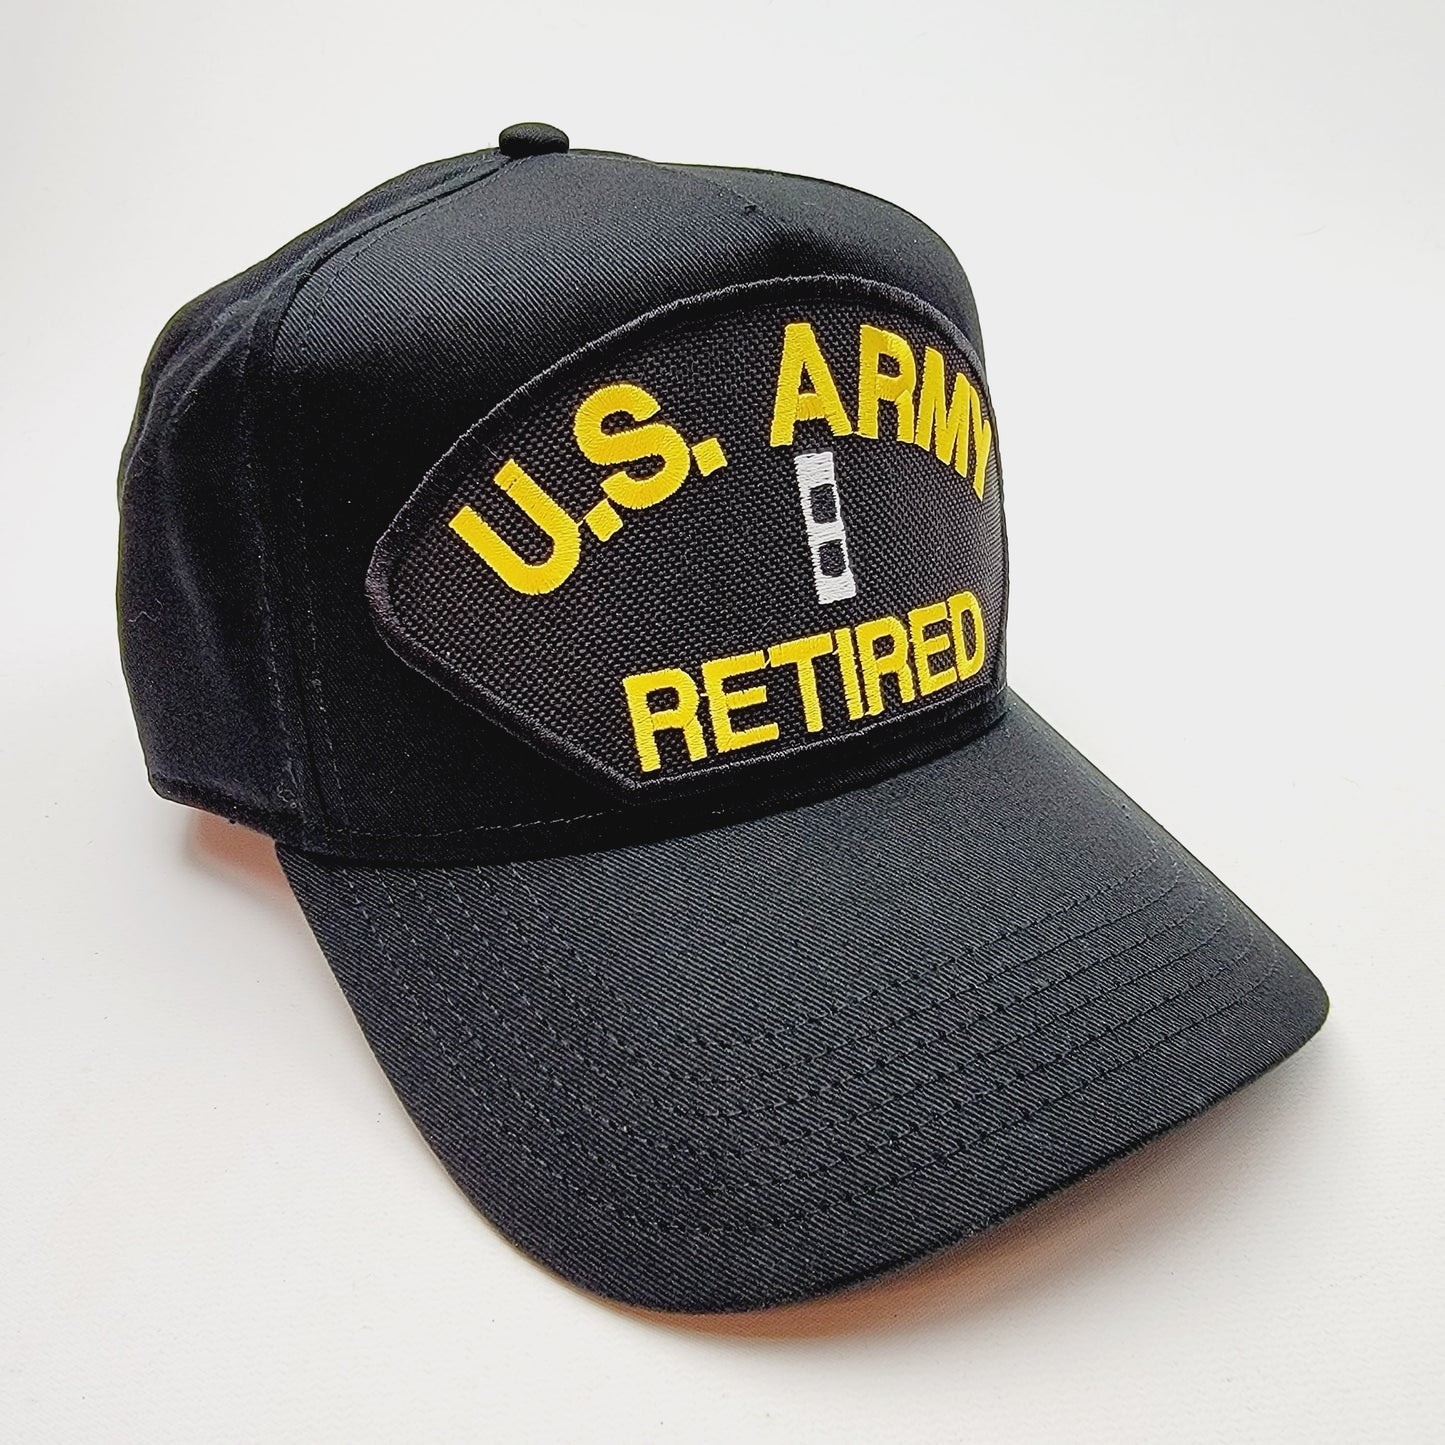 US ARMY RETIRED CHIEF WARRANT OFFICER 2 CW2 Embroidered Hat Baseball Cap Adjustable Black